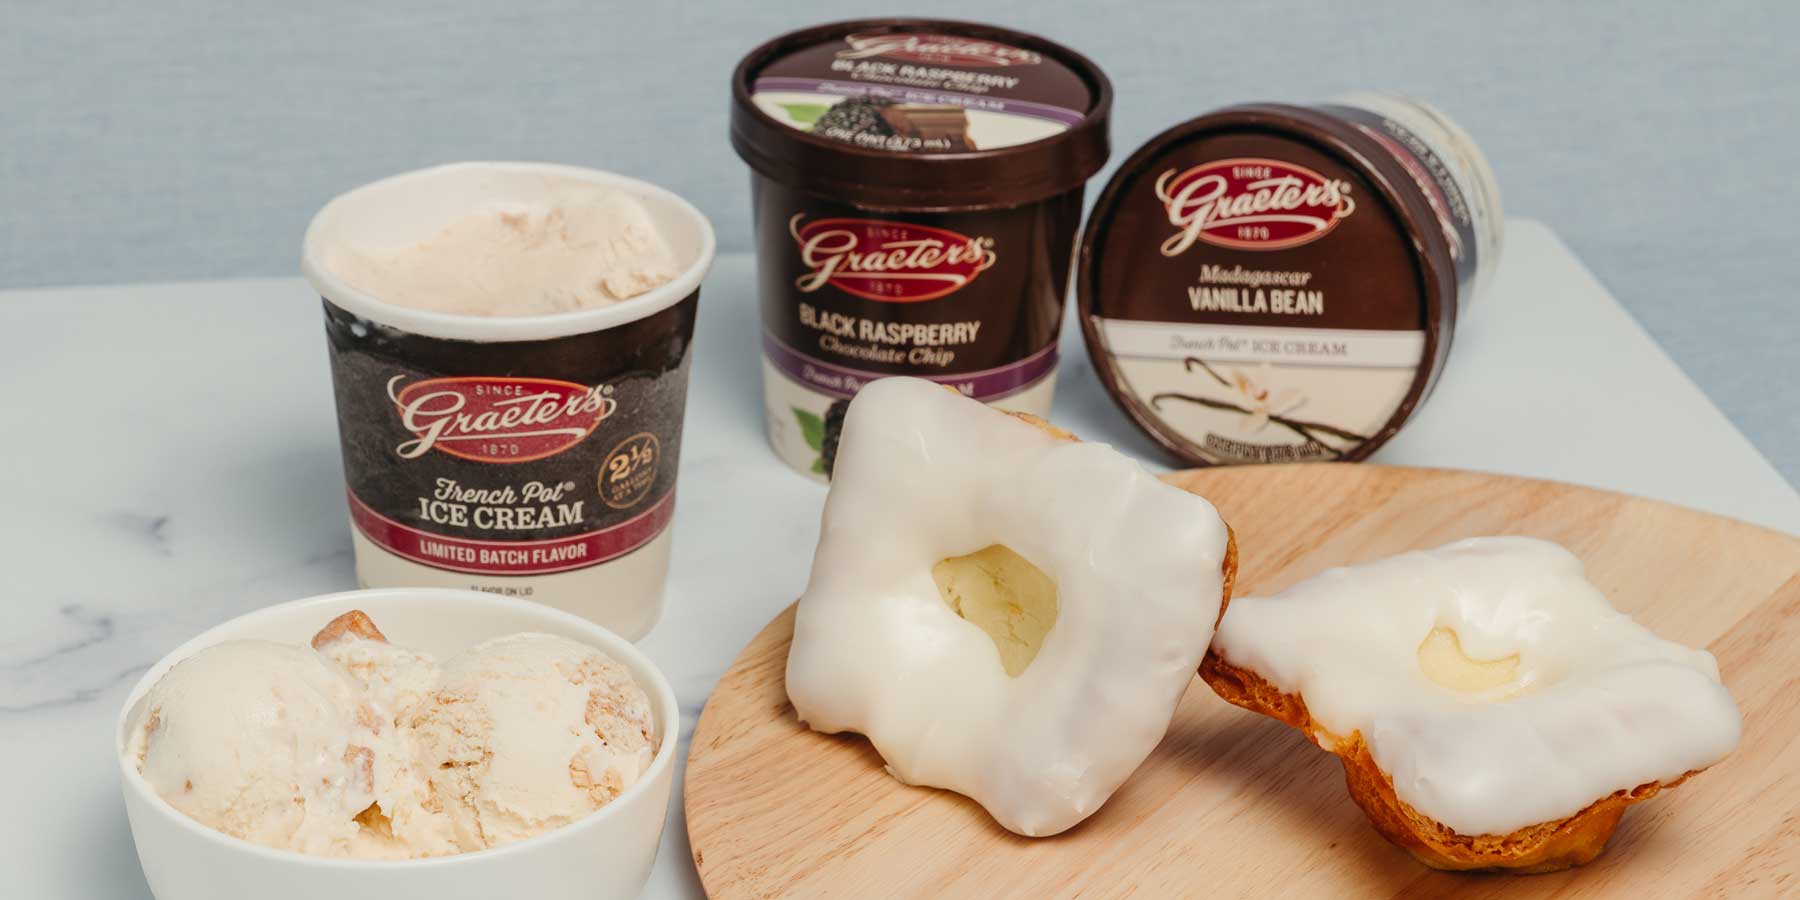 Graeter's Ice Cream Is Now Shipping Cheese Crown Ice Cream and Baked Goods For A Limited Time